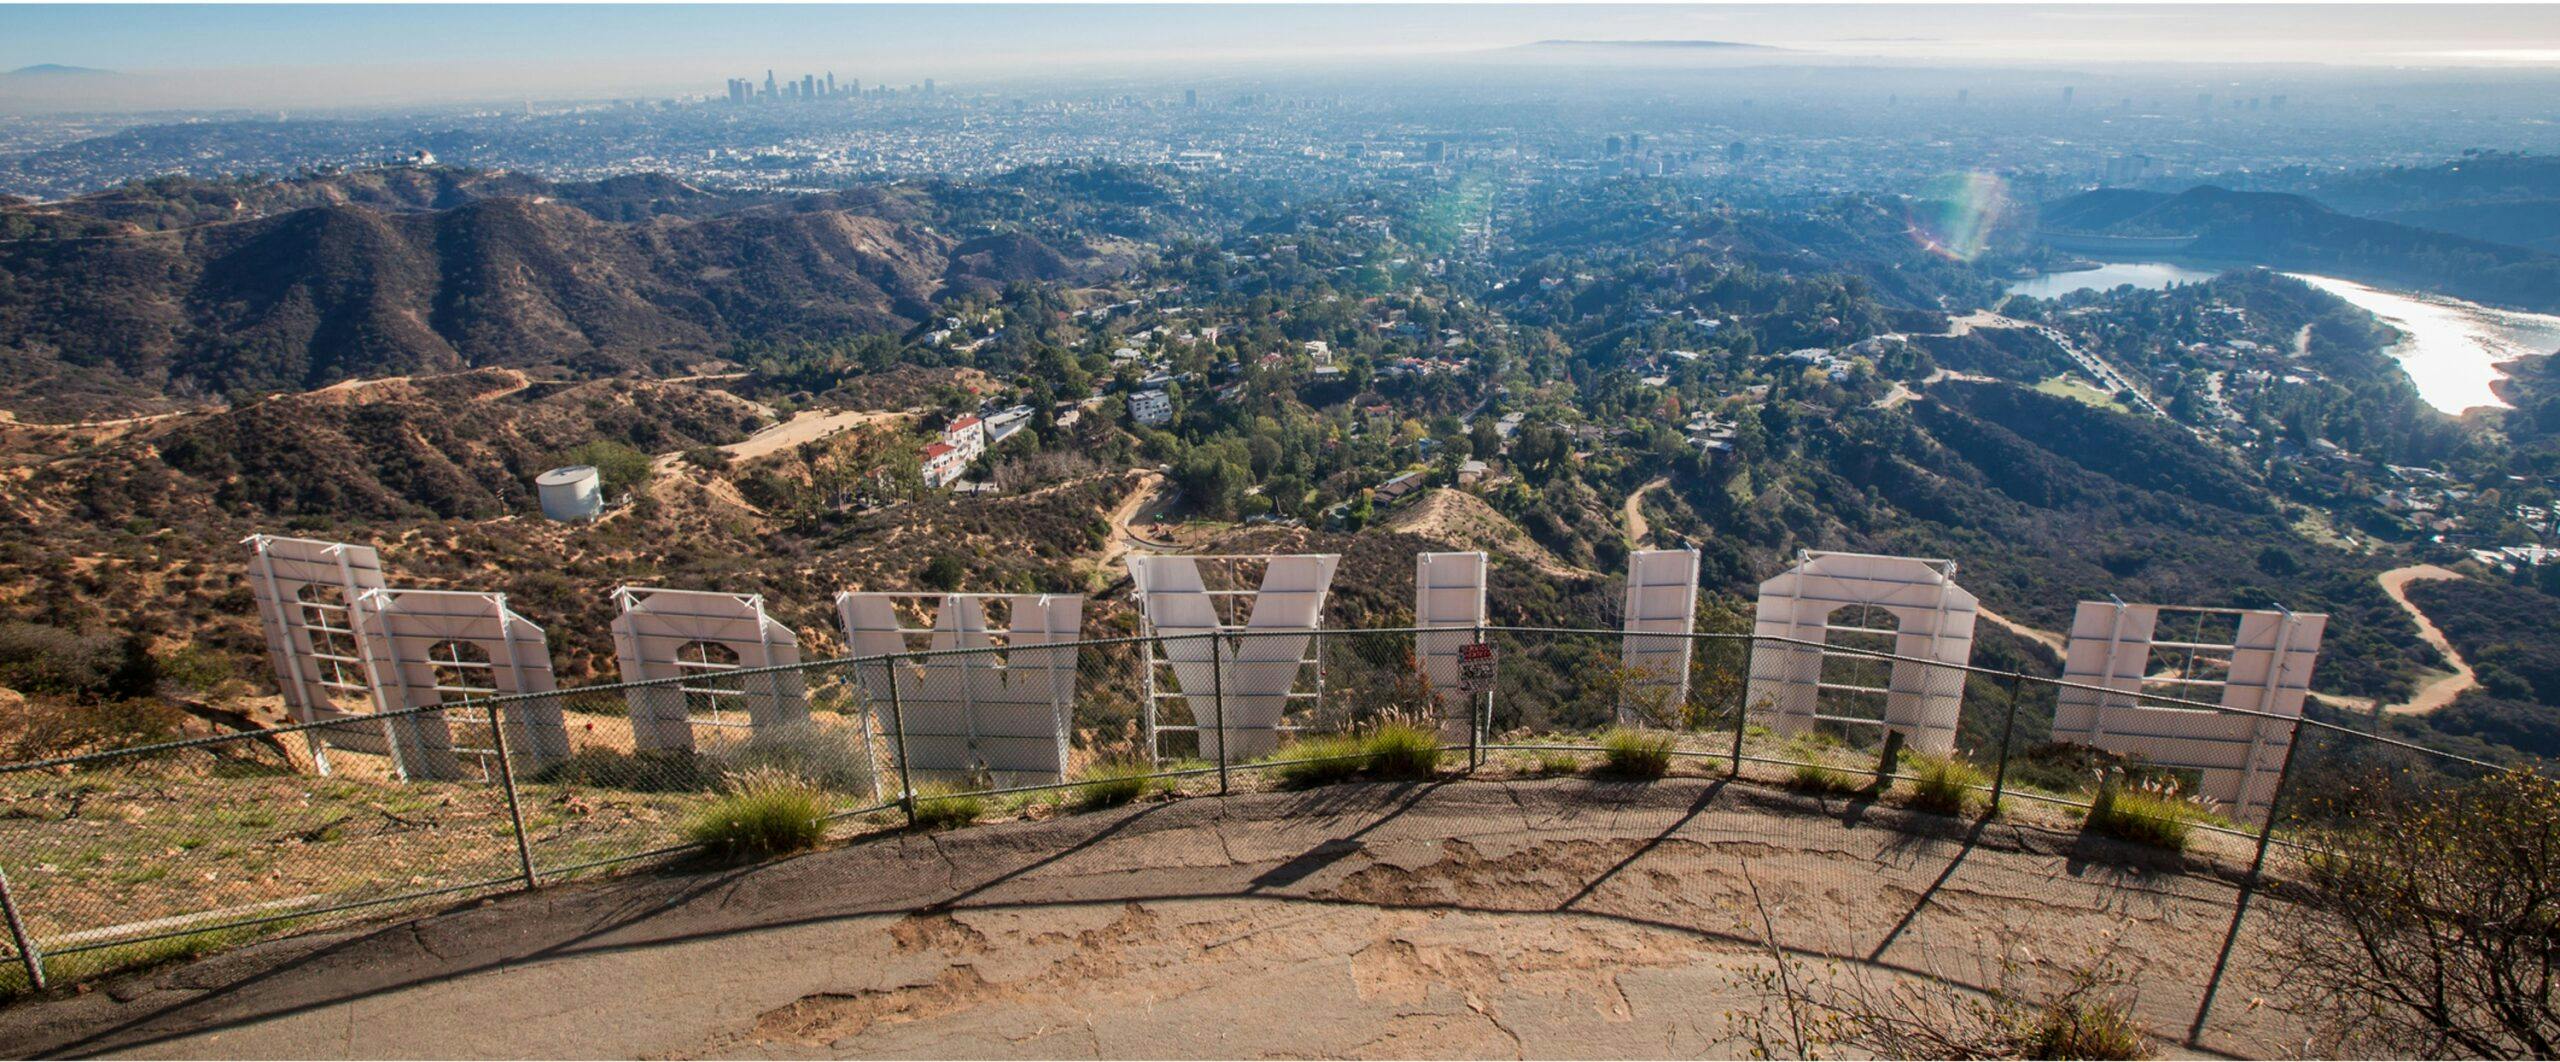 A journey through the famous Mulholland Drive